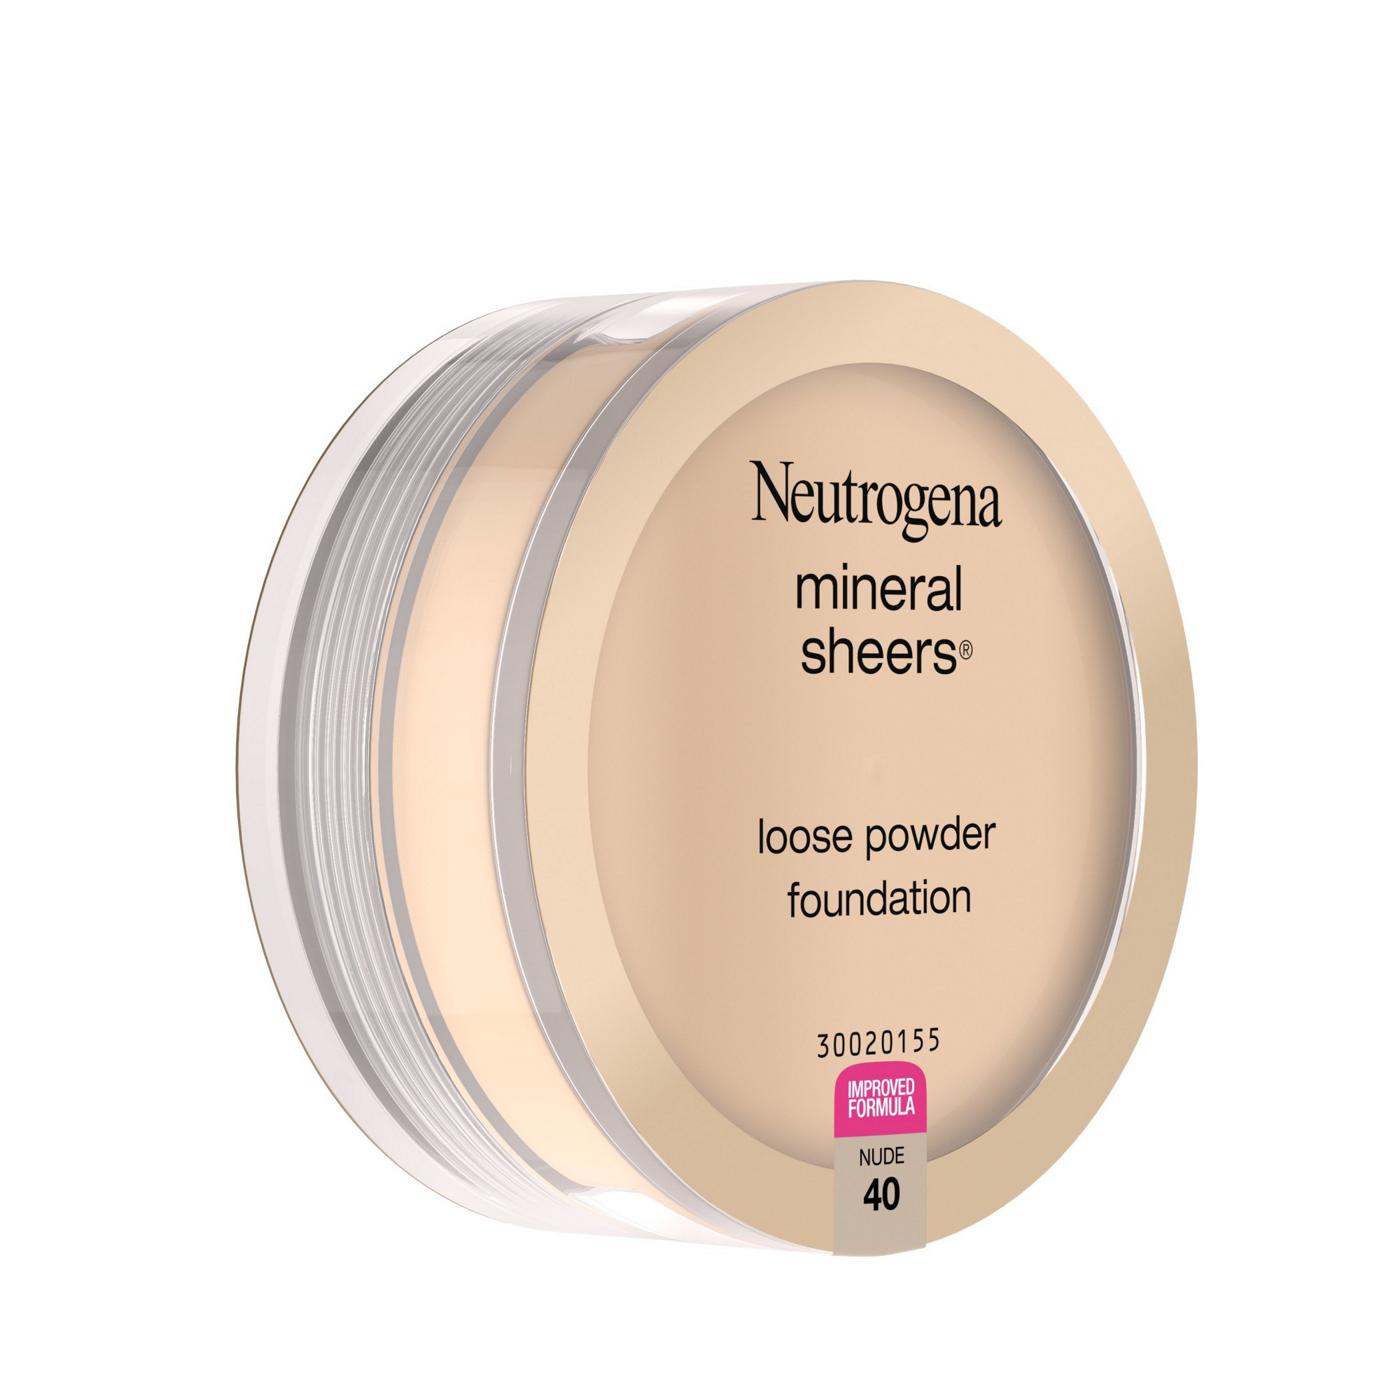 Neutrogena Mineral Sheers Loose Powder Foundation 40 Nude; image 2 of 5